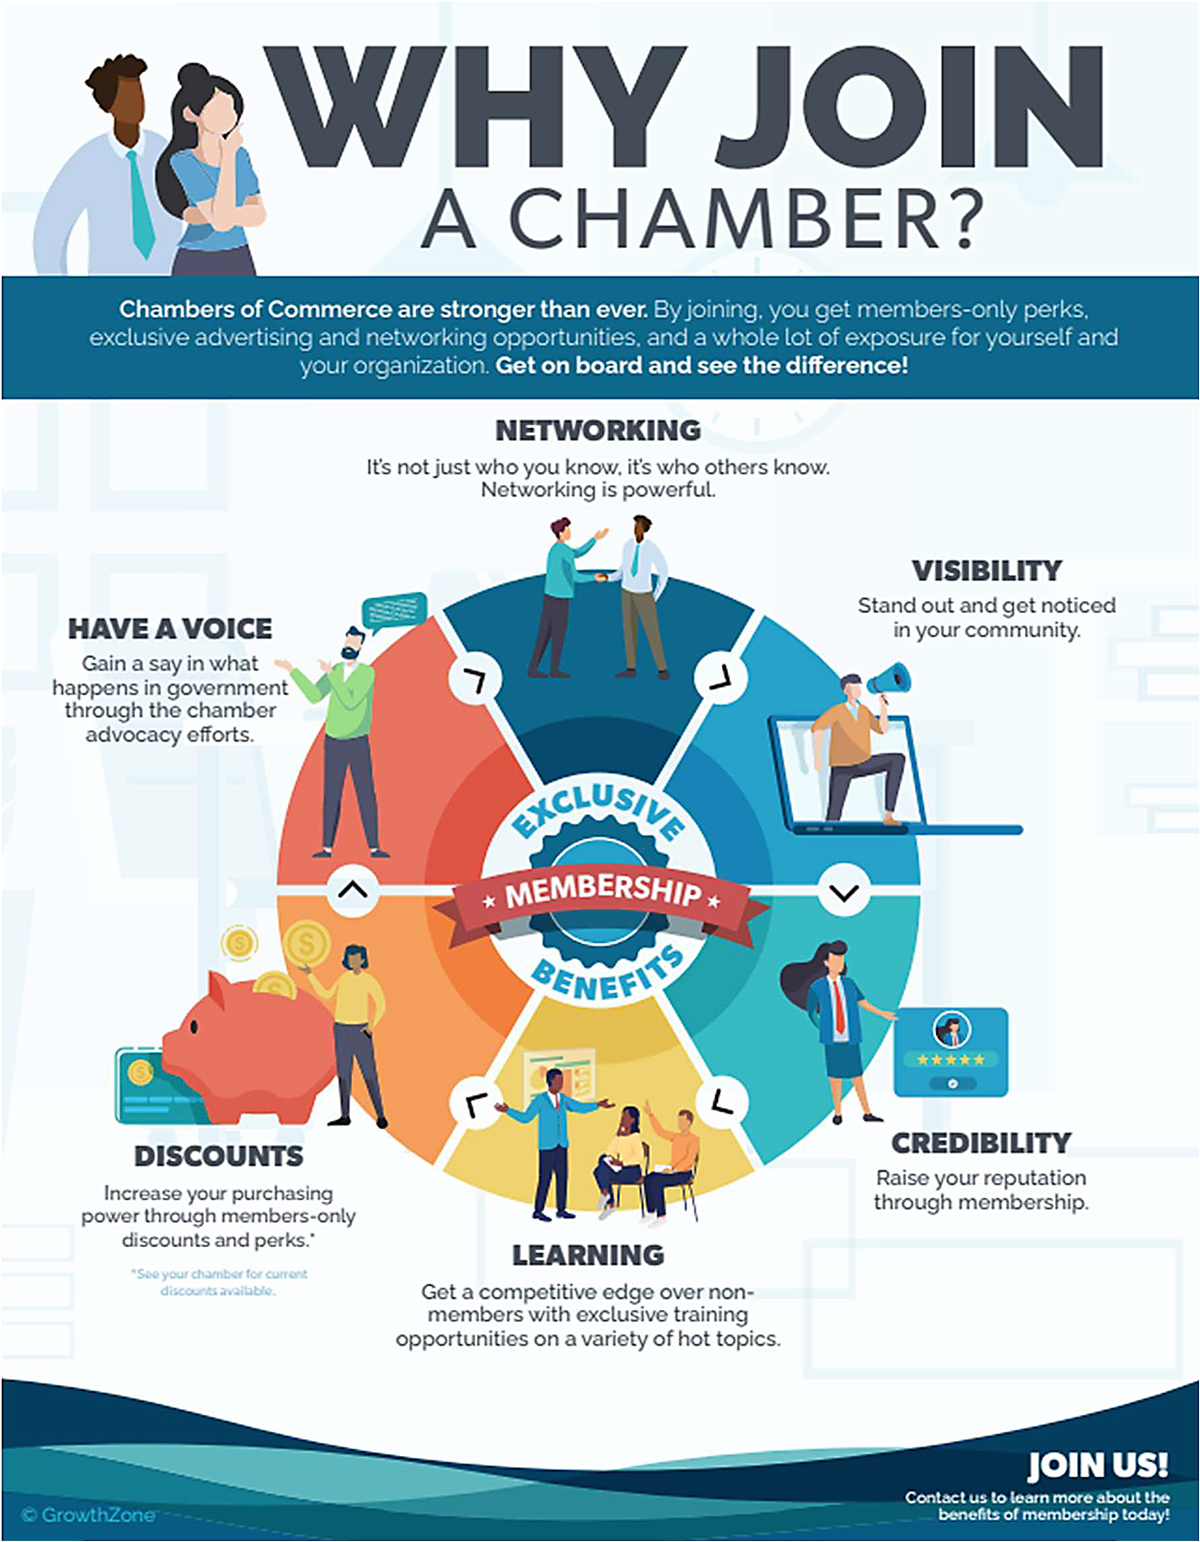 Why Join a Chamber infographic